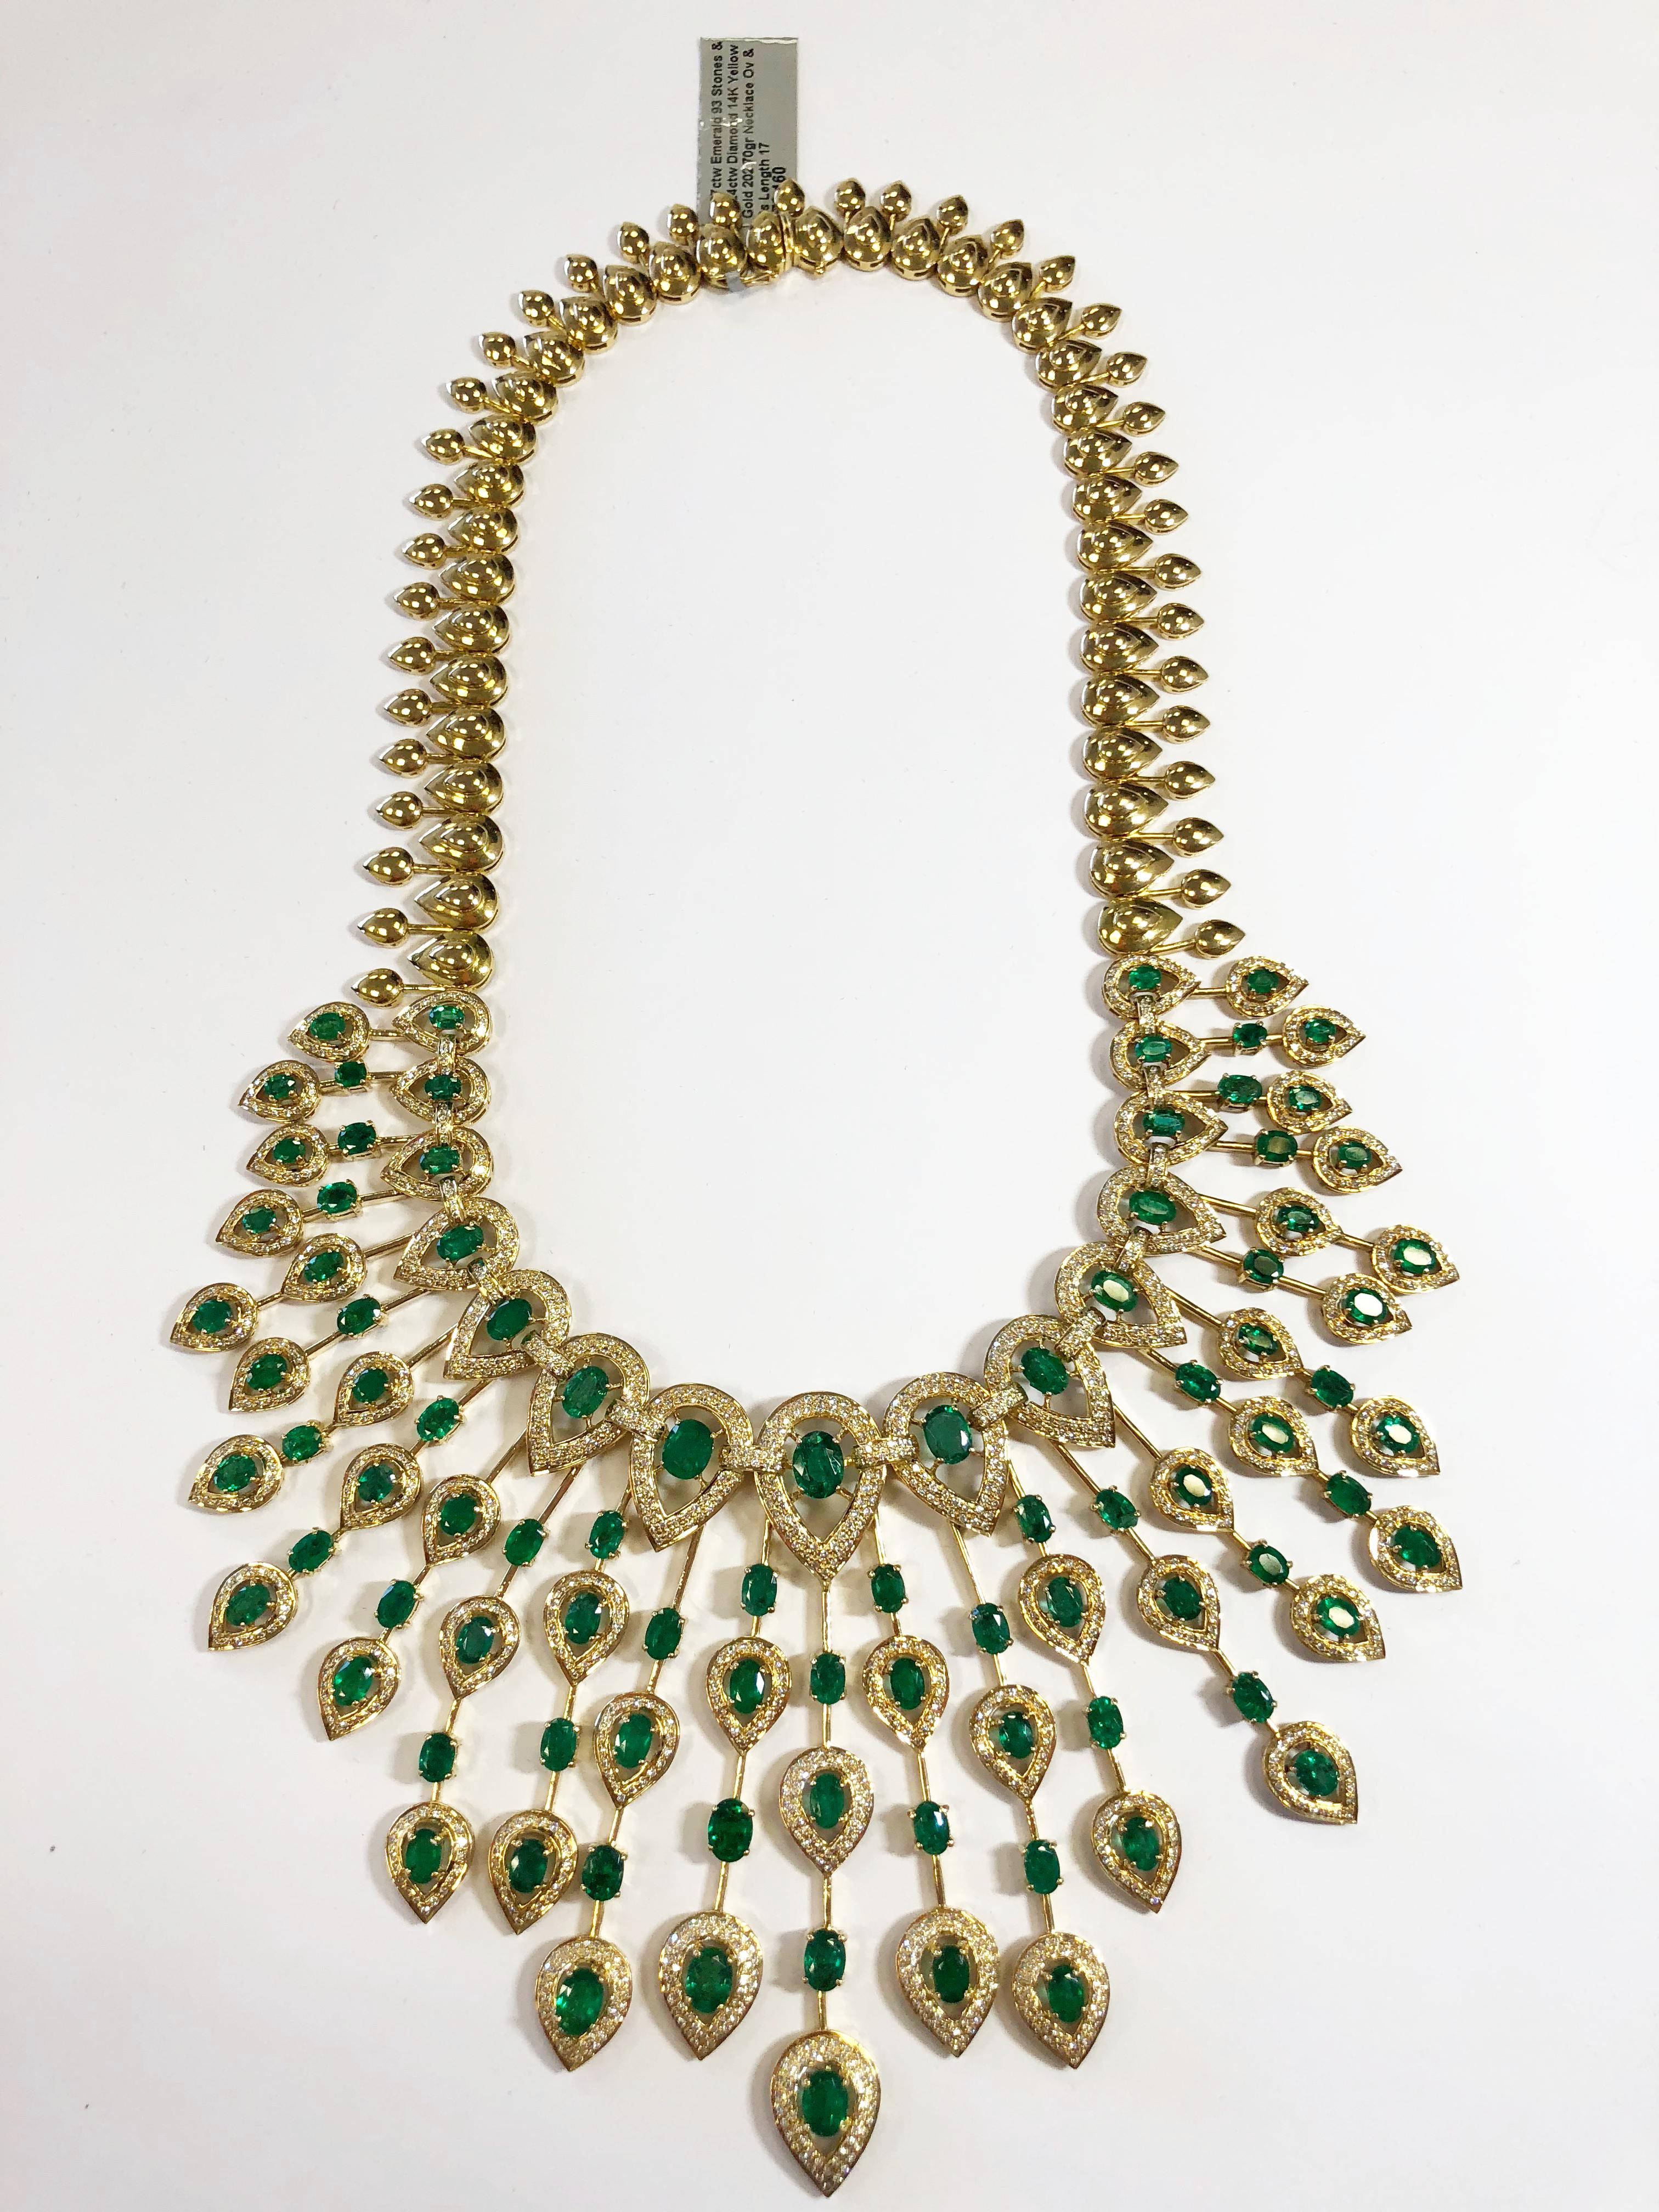 Women's or Men's Emerald and Diamond Spray Necklace in 14 Karat Yellow Gold